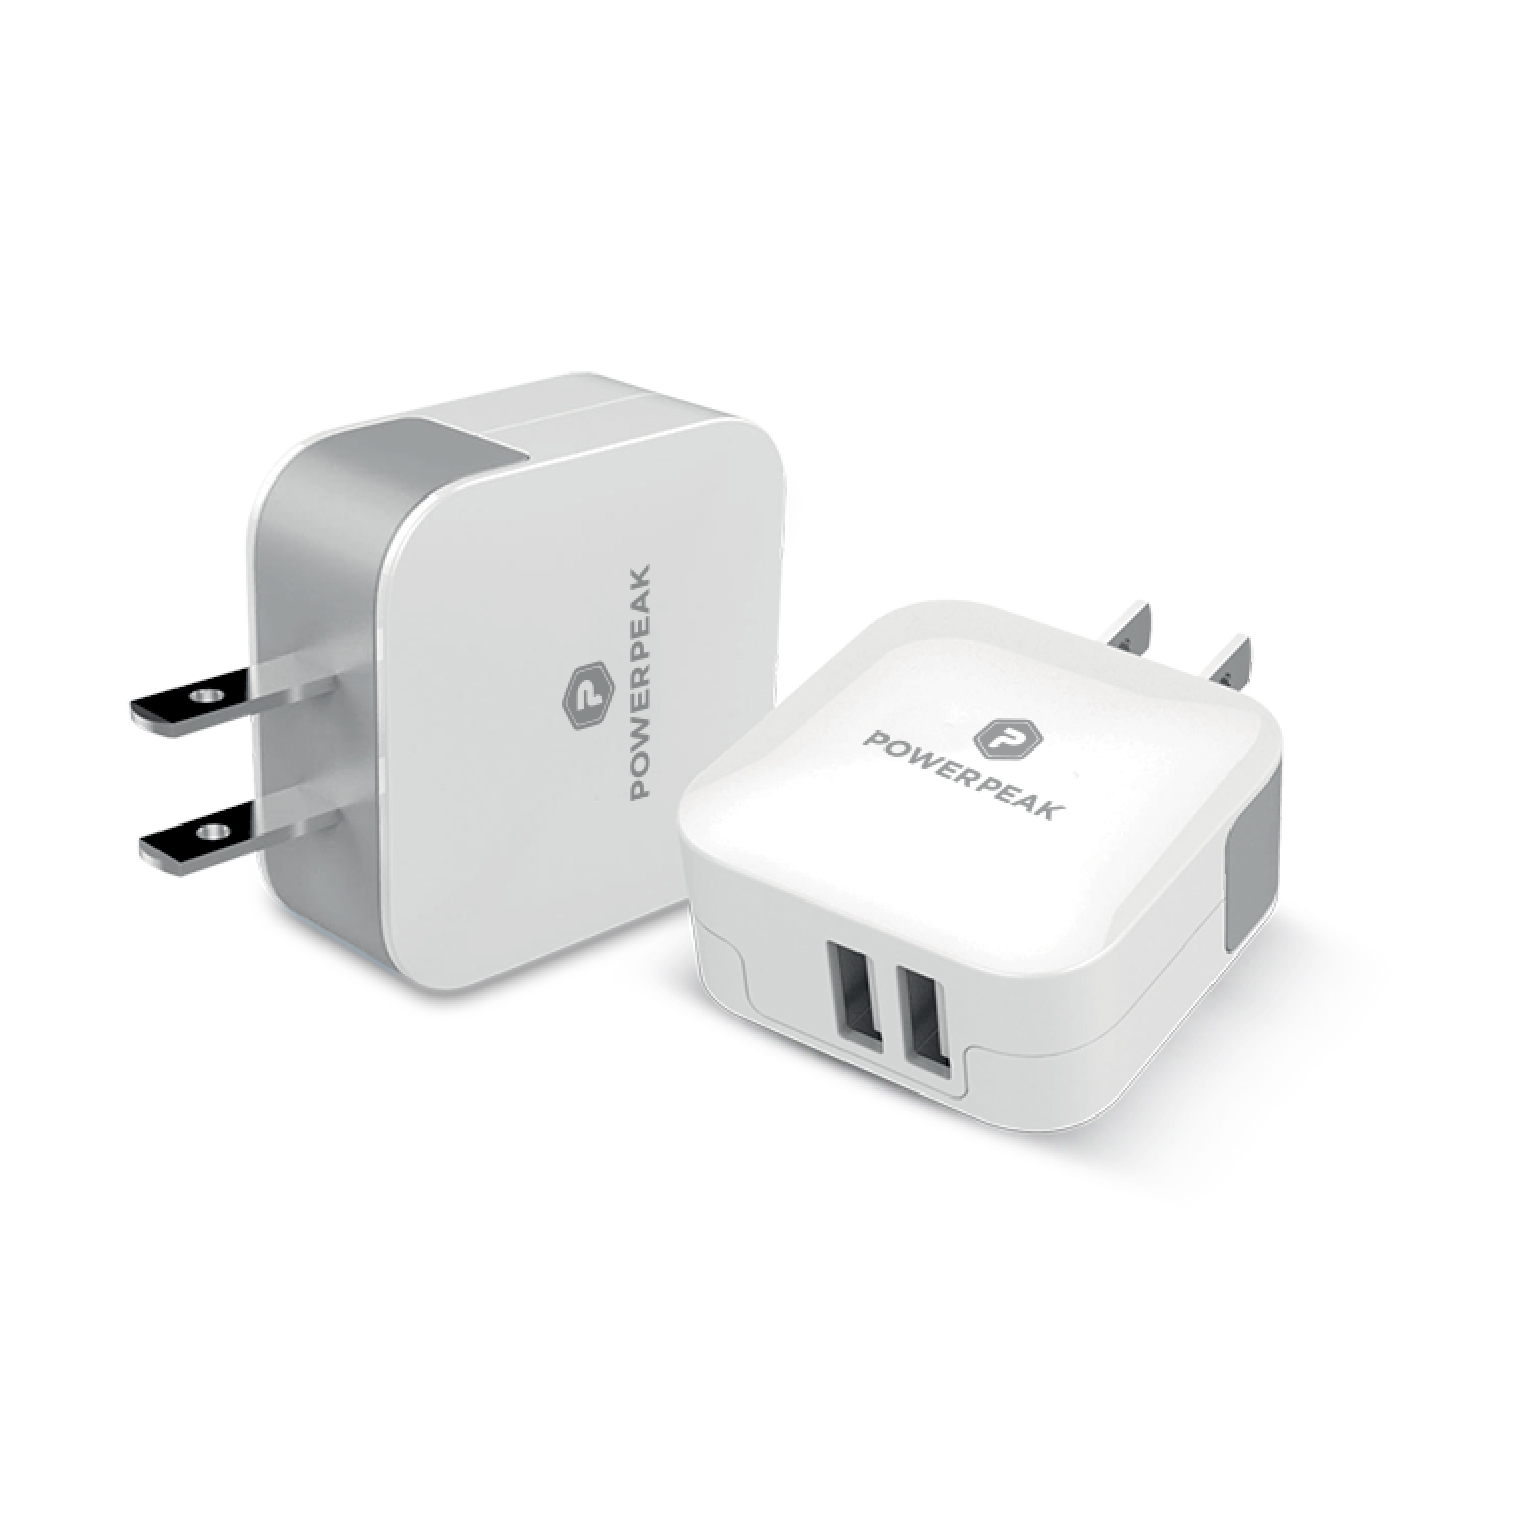 White cube dual port fast wall charger. Compatible with smartphones and tablets